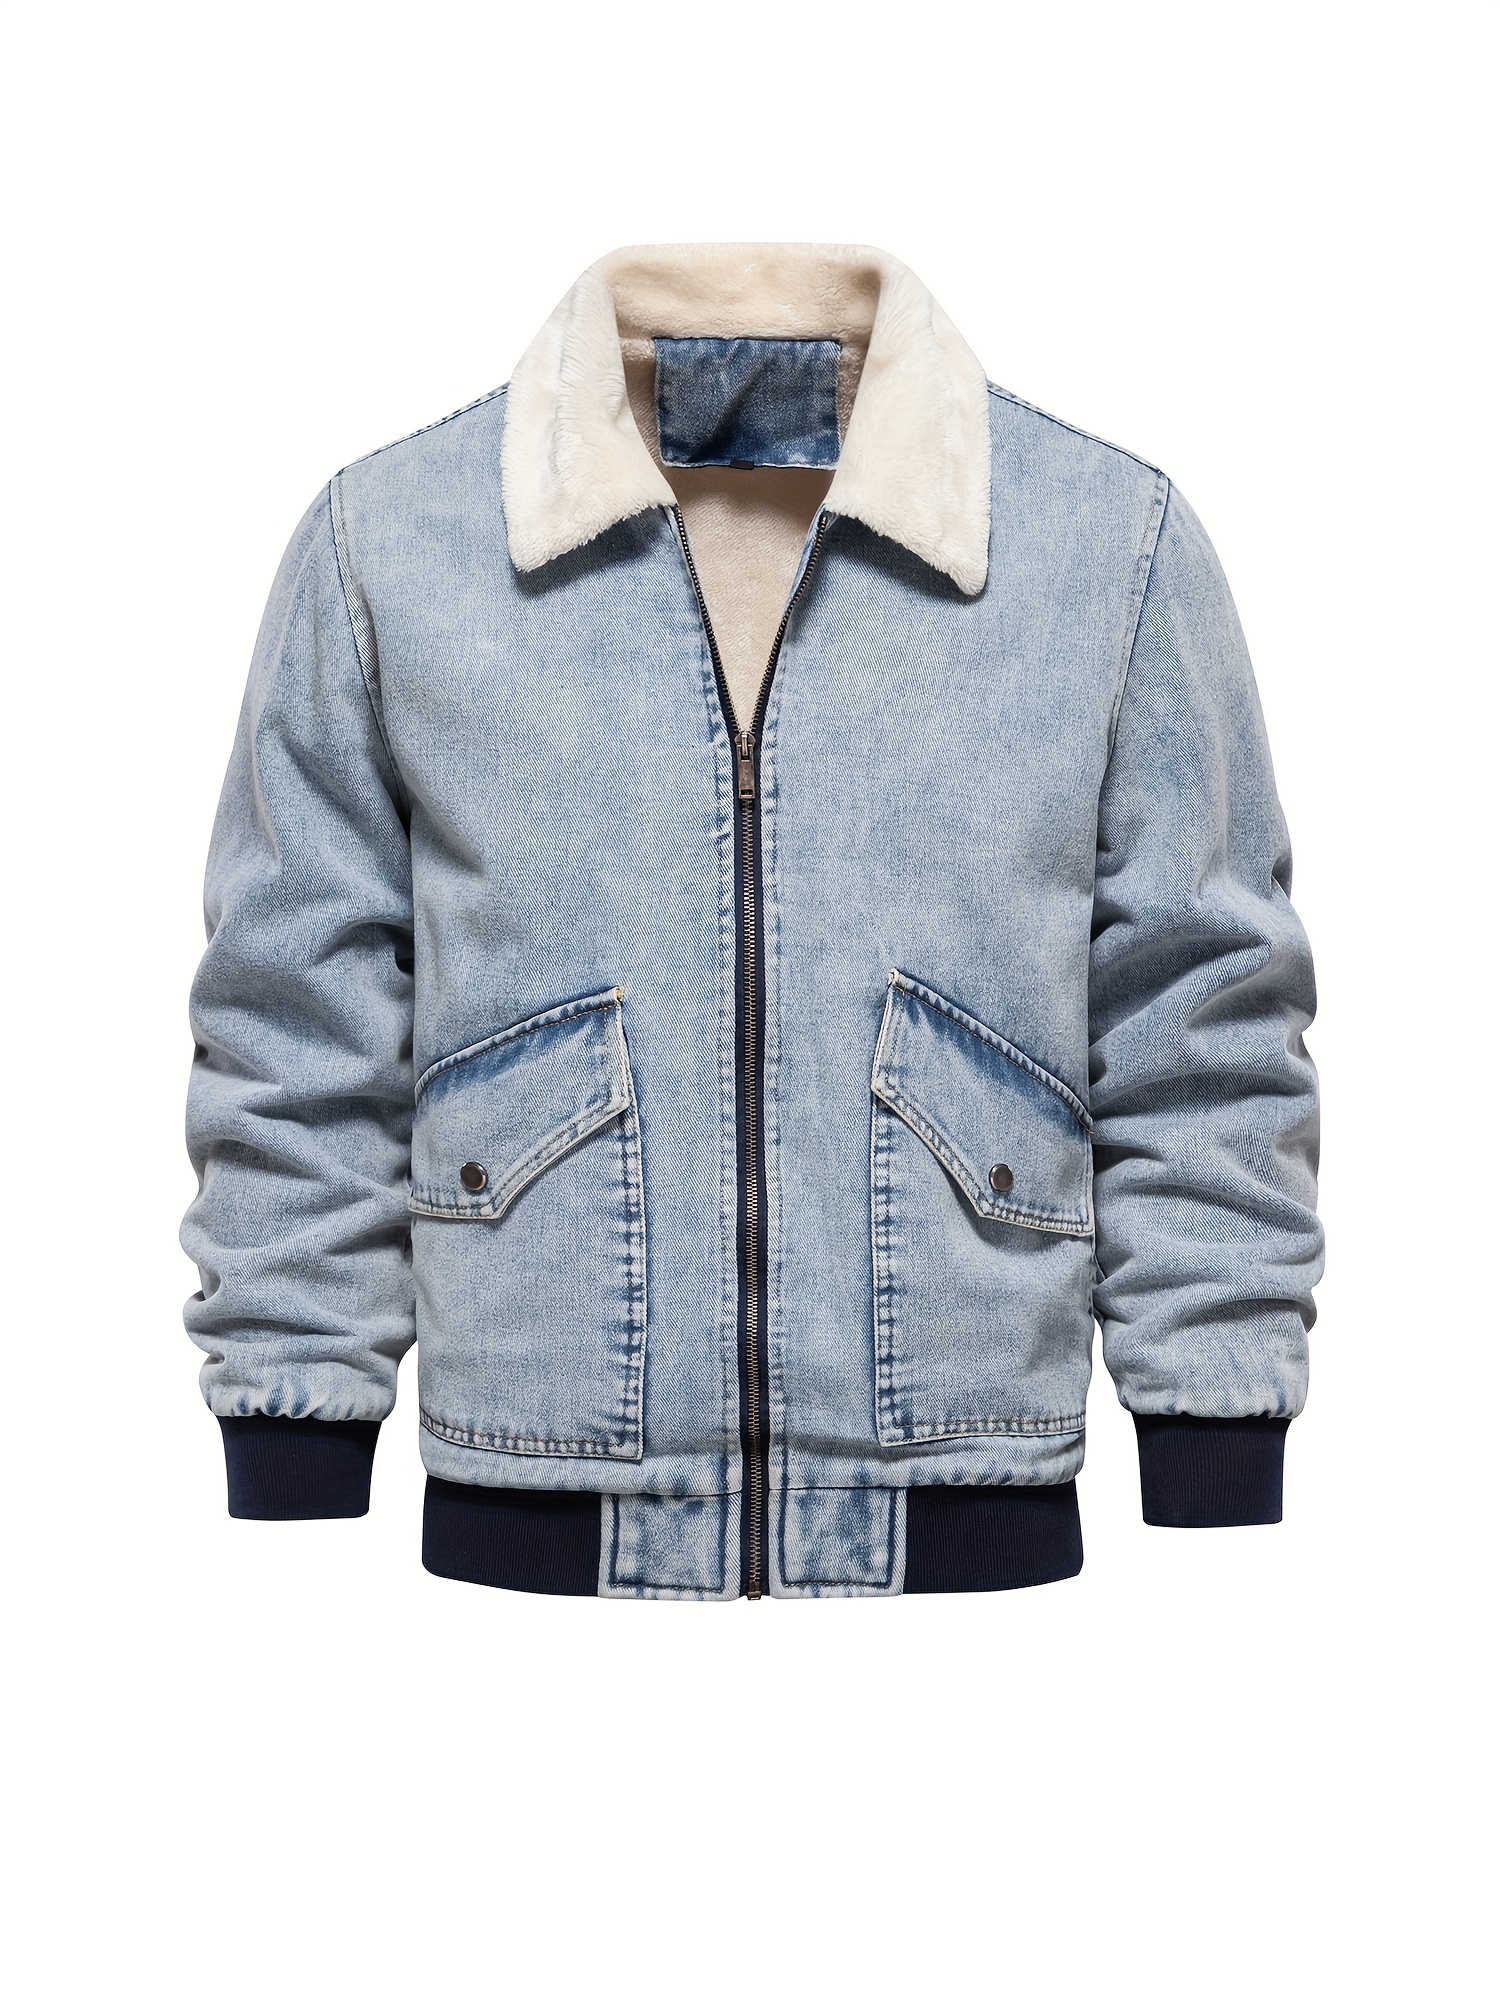 she_in Designer Jacquard Denim Jacket for Men and Women - Classic Style, Casual Loose Fit Windbreaker Denim Coat with Distress Outerwear